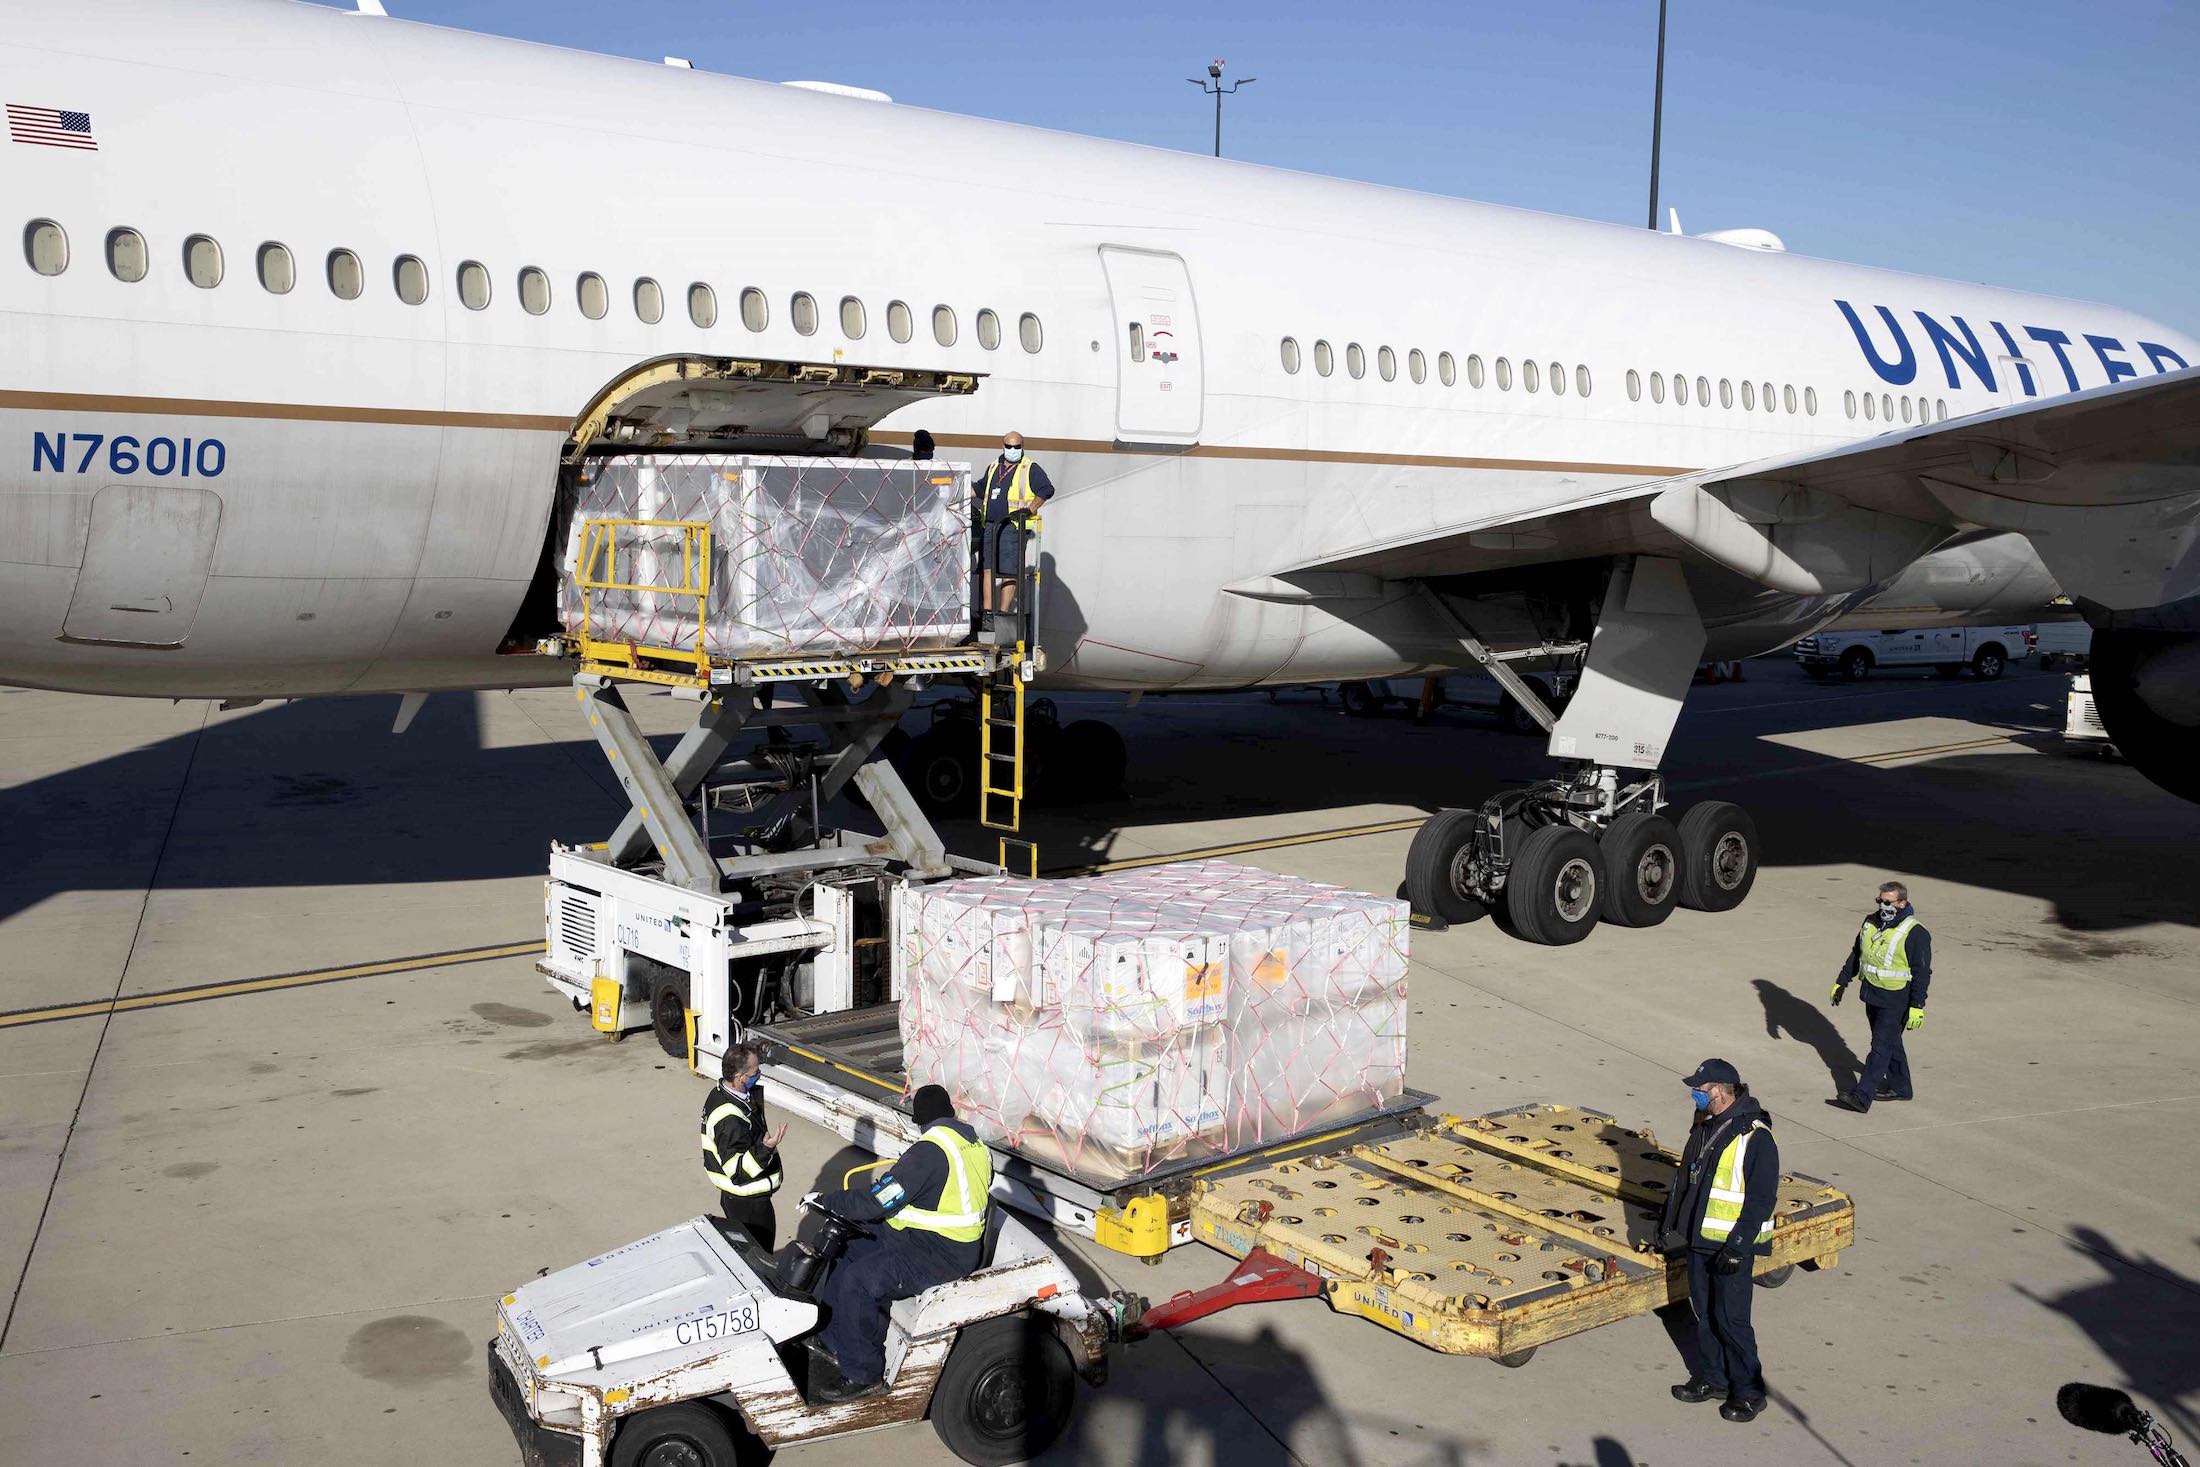 a large airplane with luggage being loaded with luggage